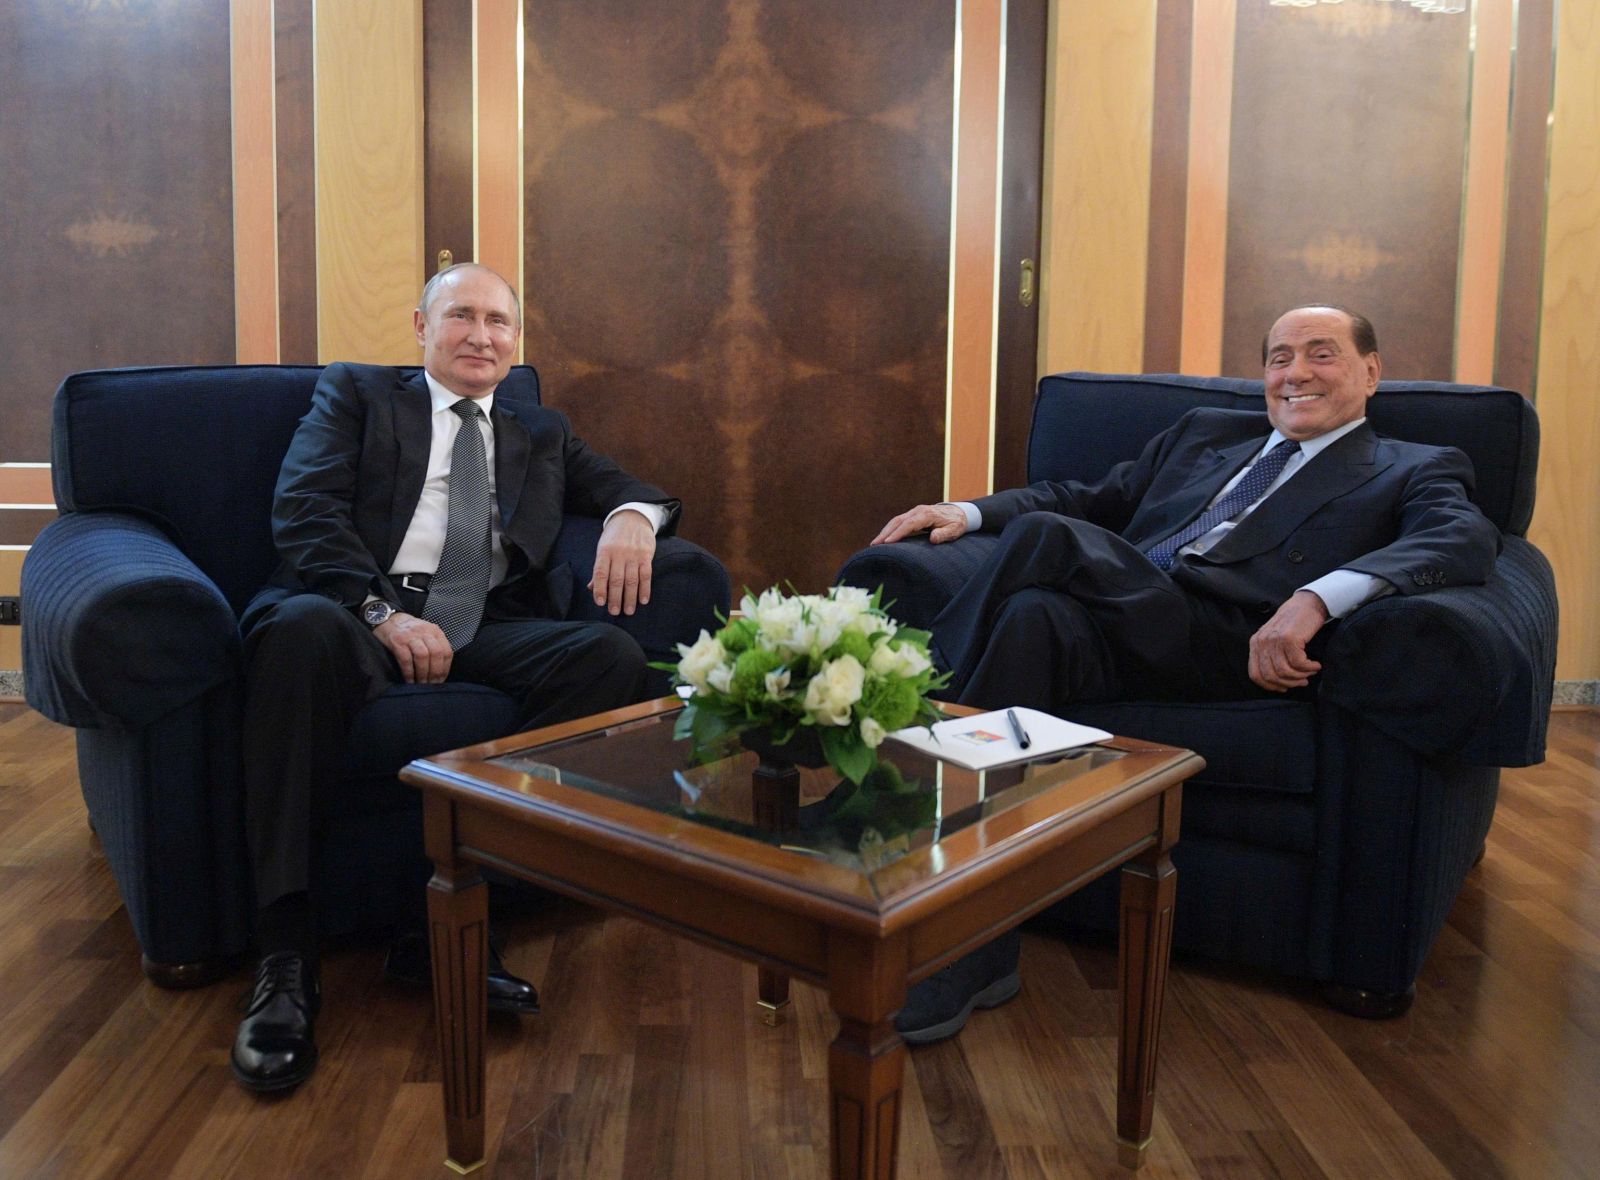 epa10686719 (FILE) - Russian President Vladimir Putin (L) meets with former Italian prime minister and head of the Forza Italia party Silvio Berlusconi (R), prior to his departure at an airport in Rome, Italy, late 04 July 2019 (reissued 12 June 2023). Silvio Berlusconi has died at the age of 86 on 12 June 2023 at San Raffaele hospital in Milan, where he was hospitalized again since last 09 June, sources close to his family told ANSA. The Italian media tycoon and Forza Italia (FI) party founder served as prime minister of Italy in four governments.  EPA/ALEXEI DRUZHININ / SPUTNIK / KREMLIN POOL MANDATORY CREDIT